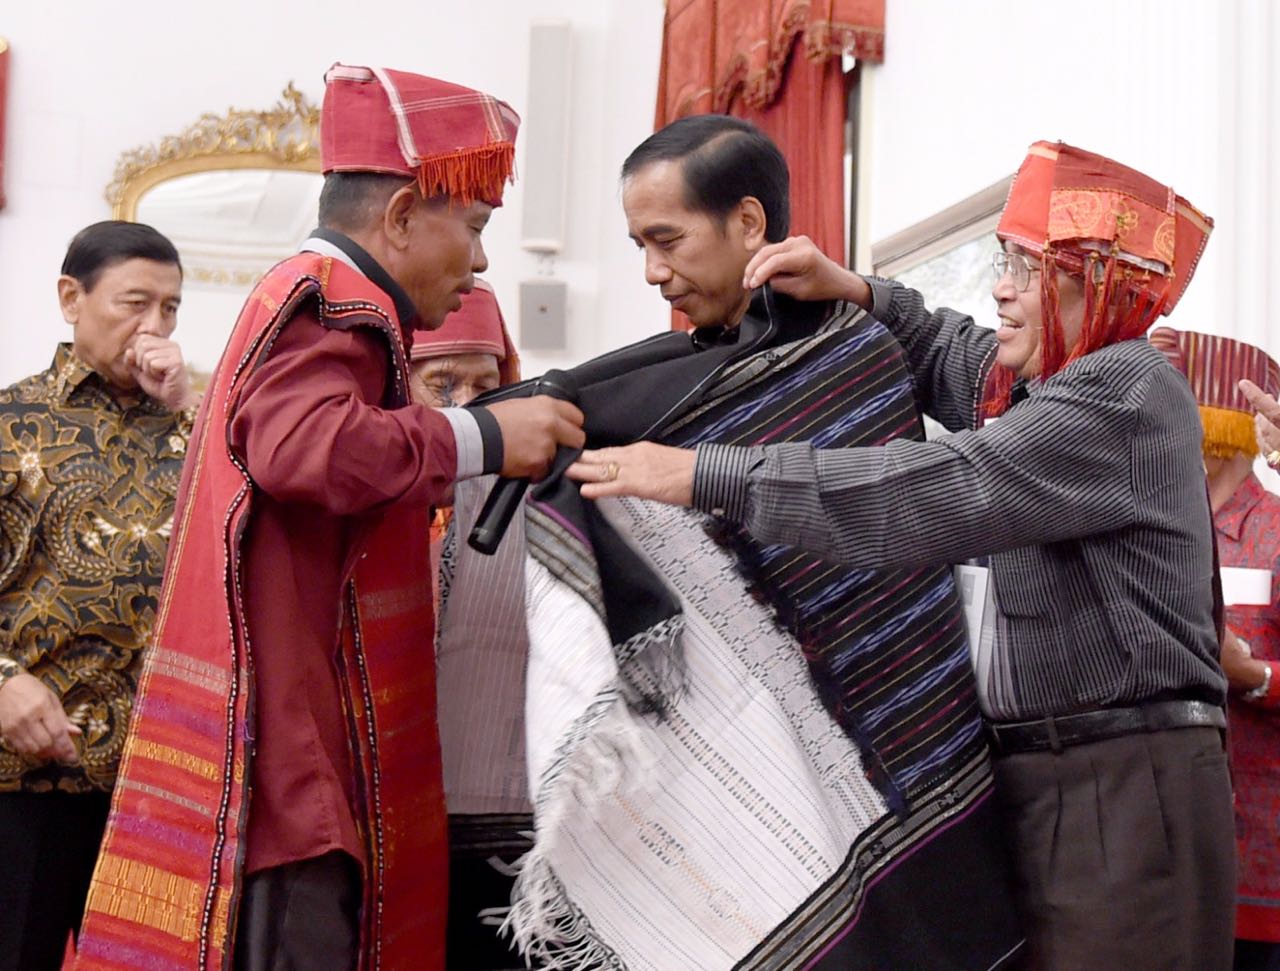 Jokowi receives traditional dress after recognizing land rights